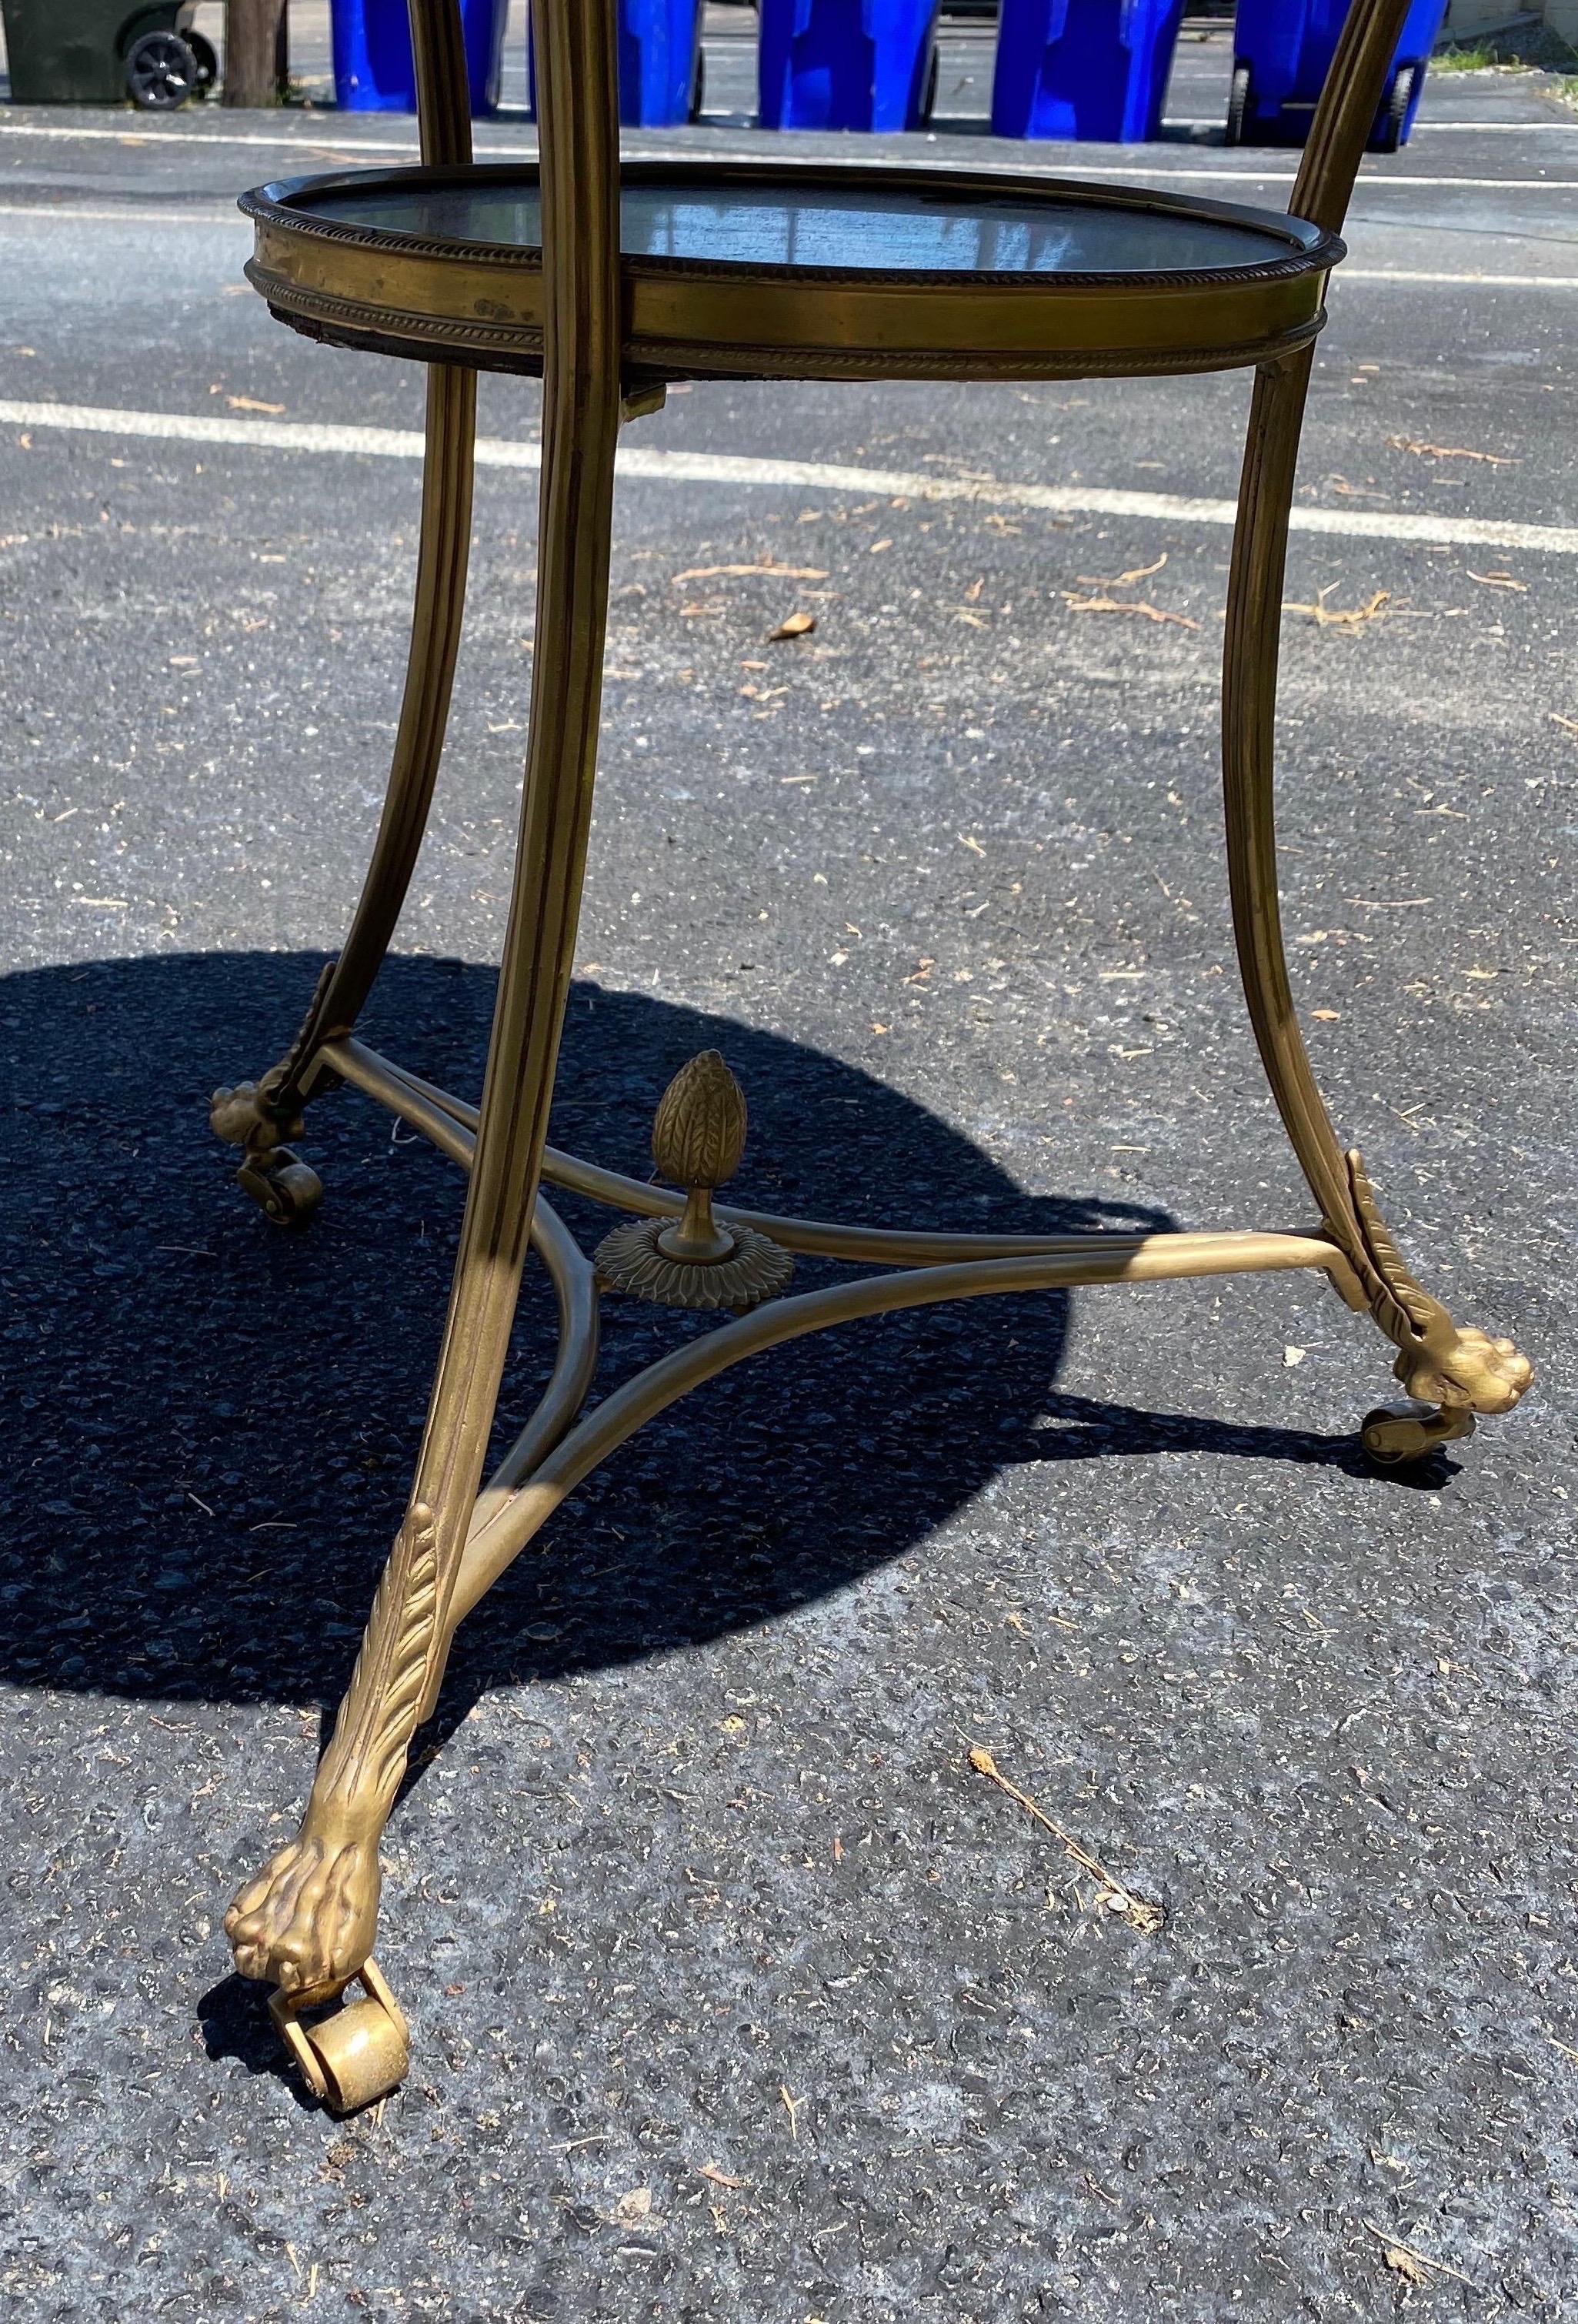 Great, high quality late 19th-early 20th century Directoire style bronze gueridon with black polished granite top, paw feet and bronze castors.